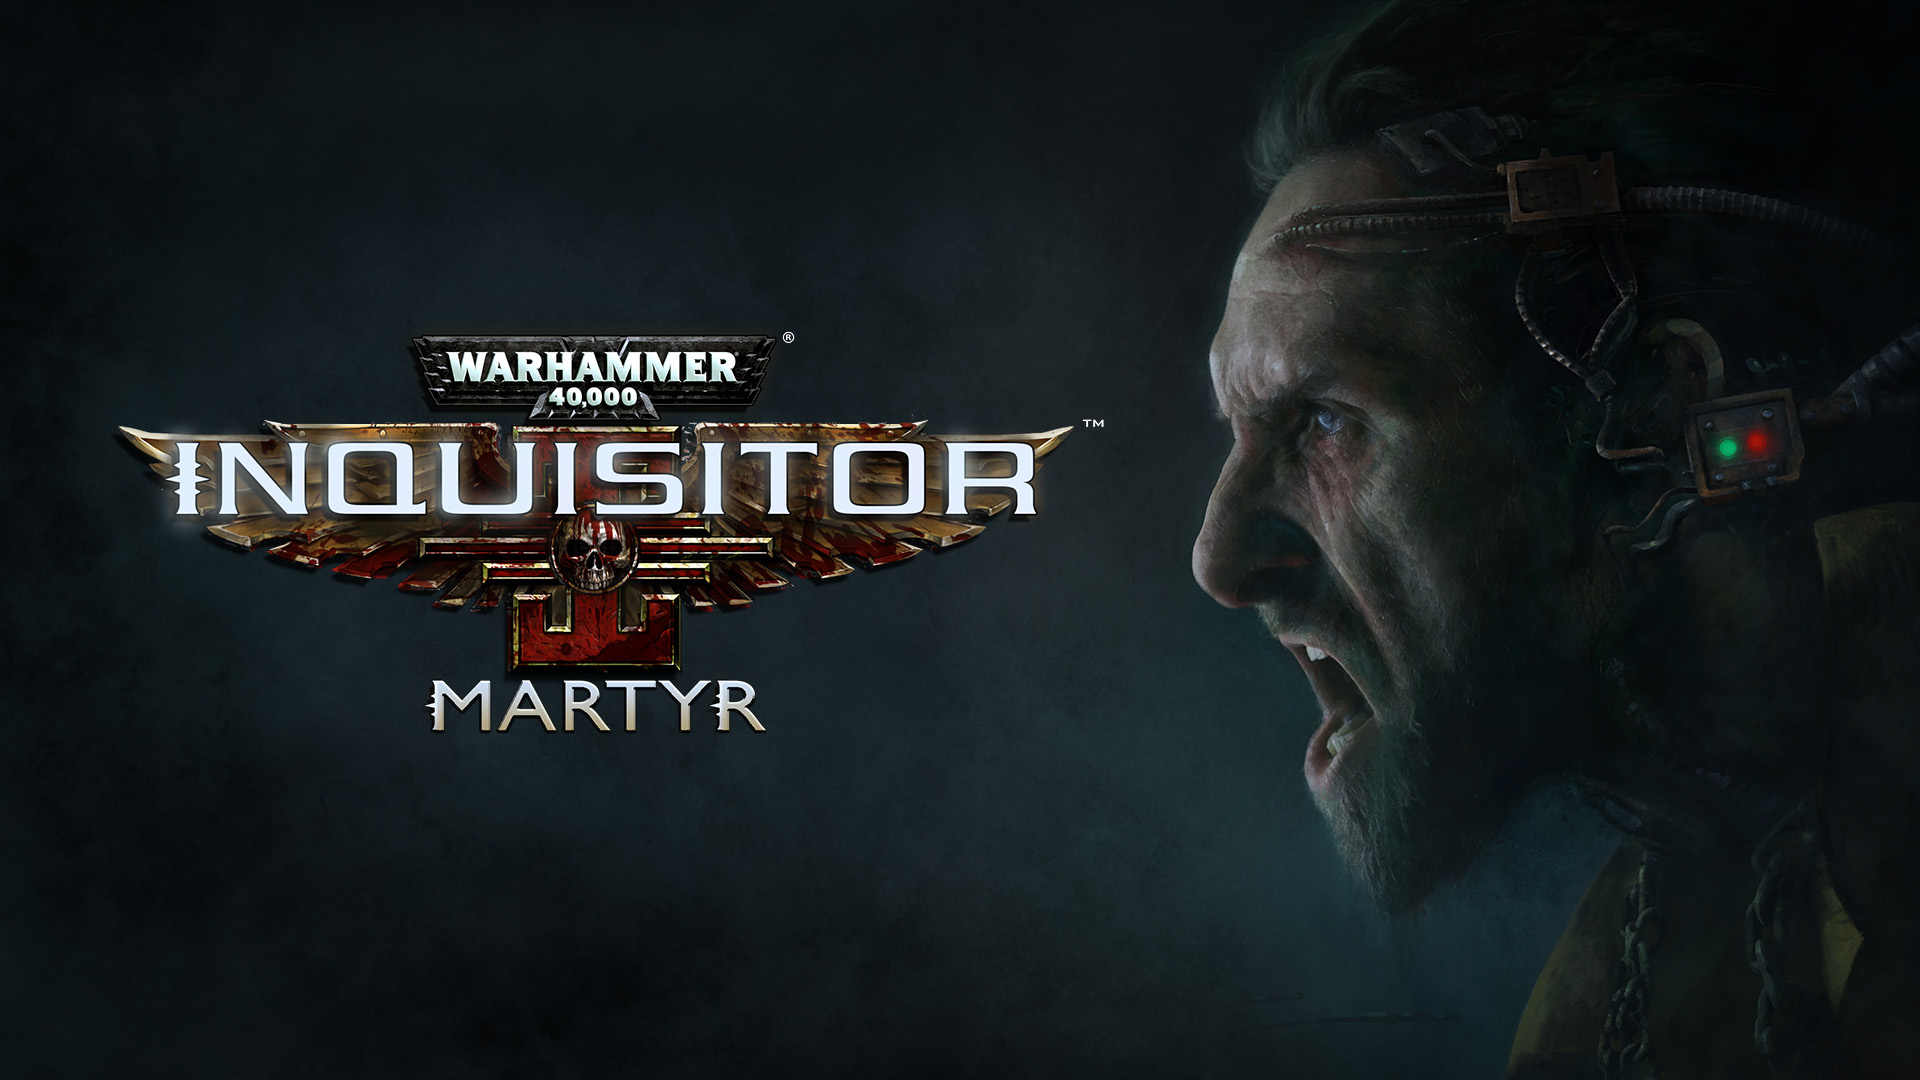 Warhammer 40,000 Inquisitor Martyr Review – Bloodfest